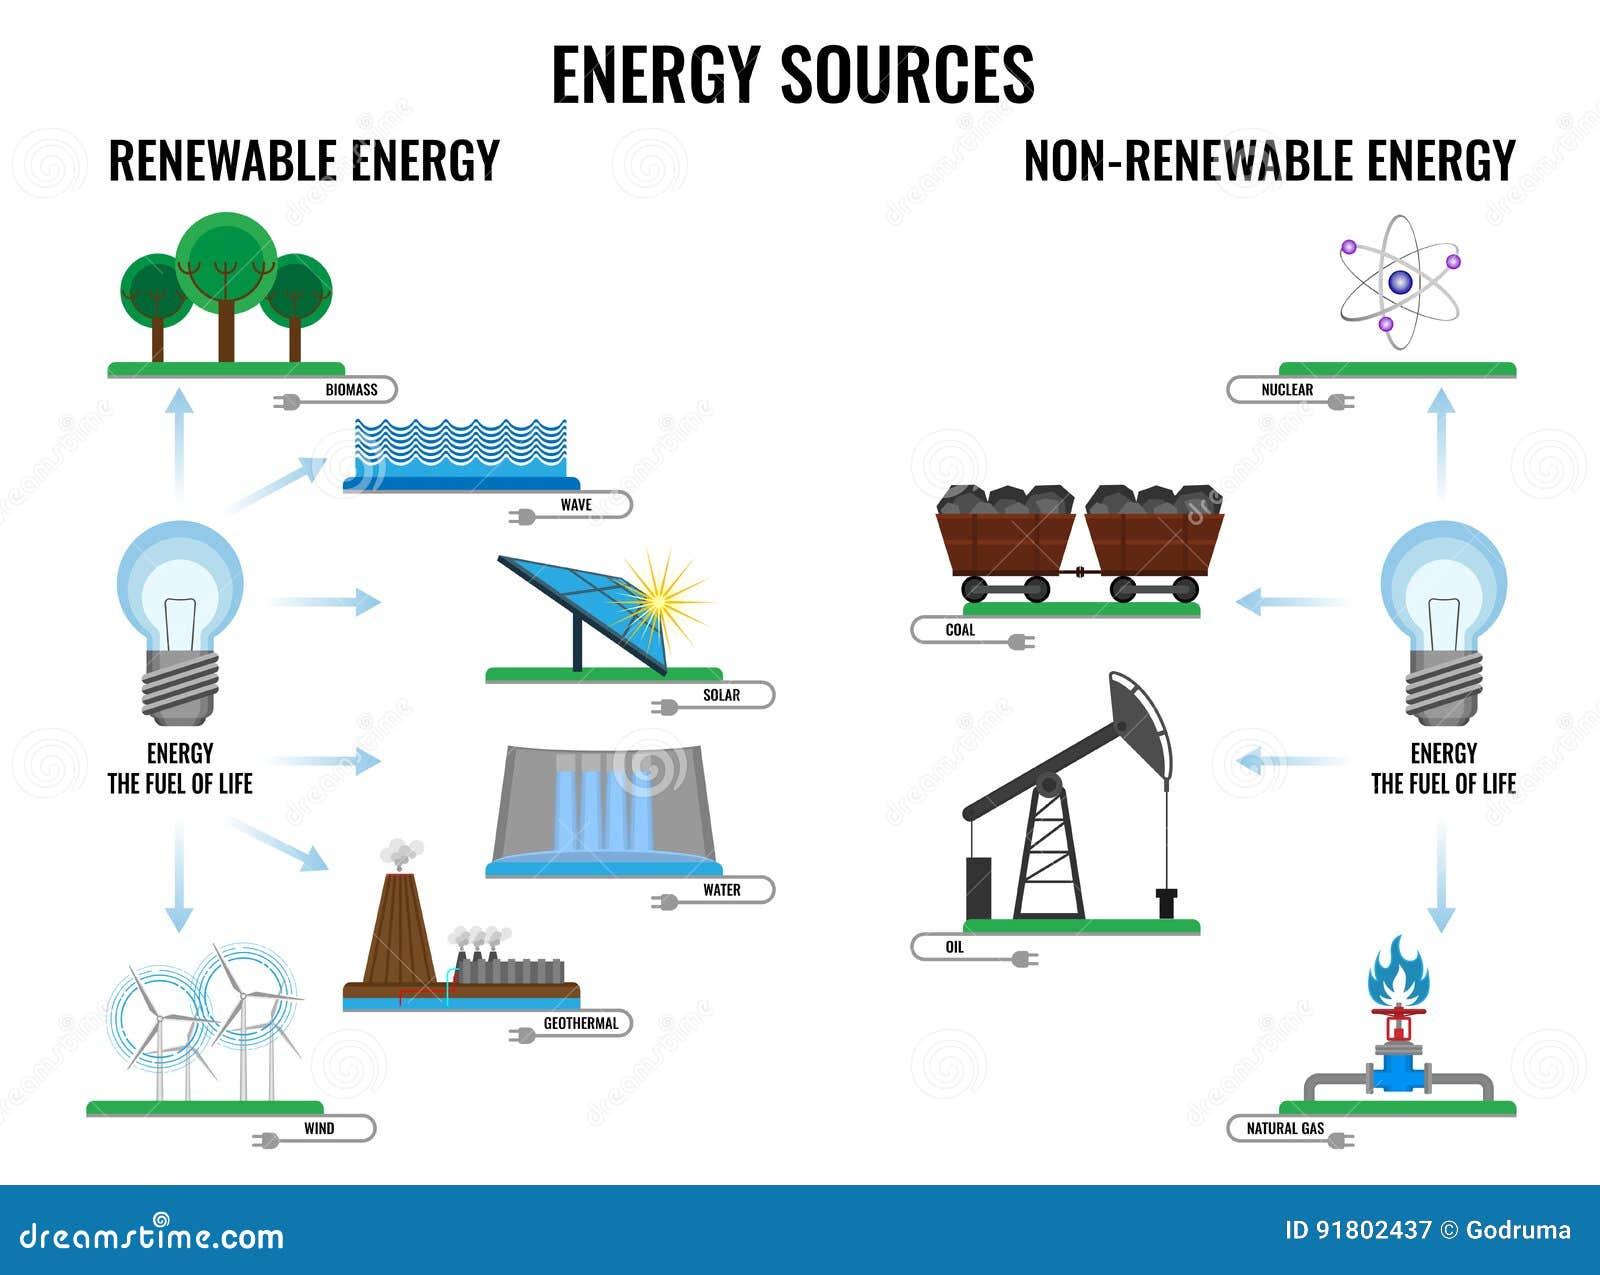 renewable and non-renewable energy sources poster on white